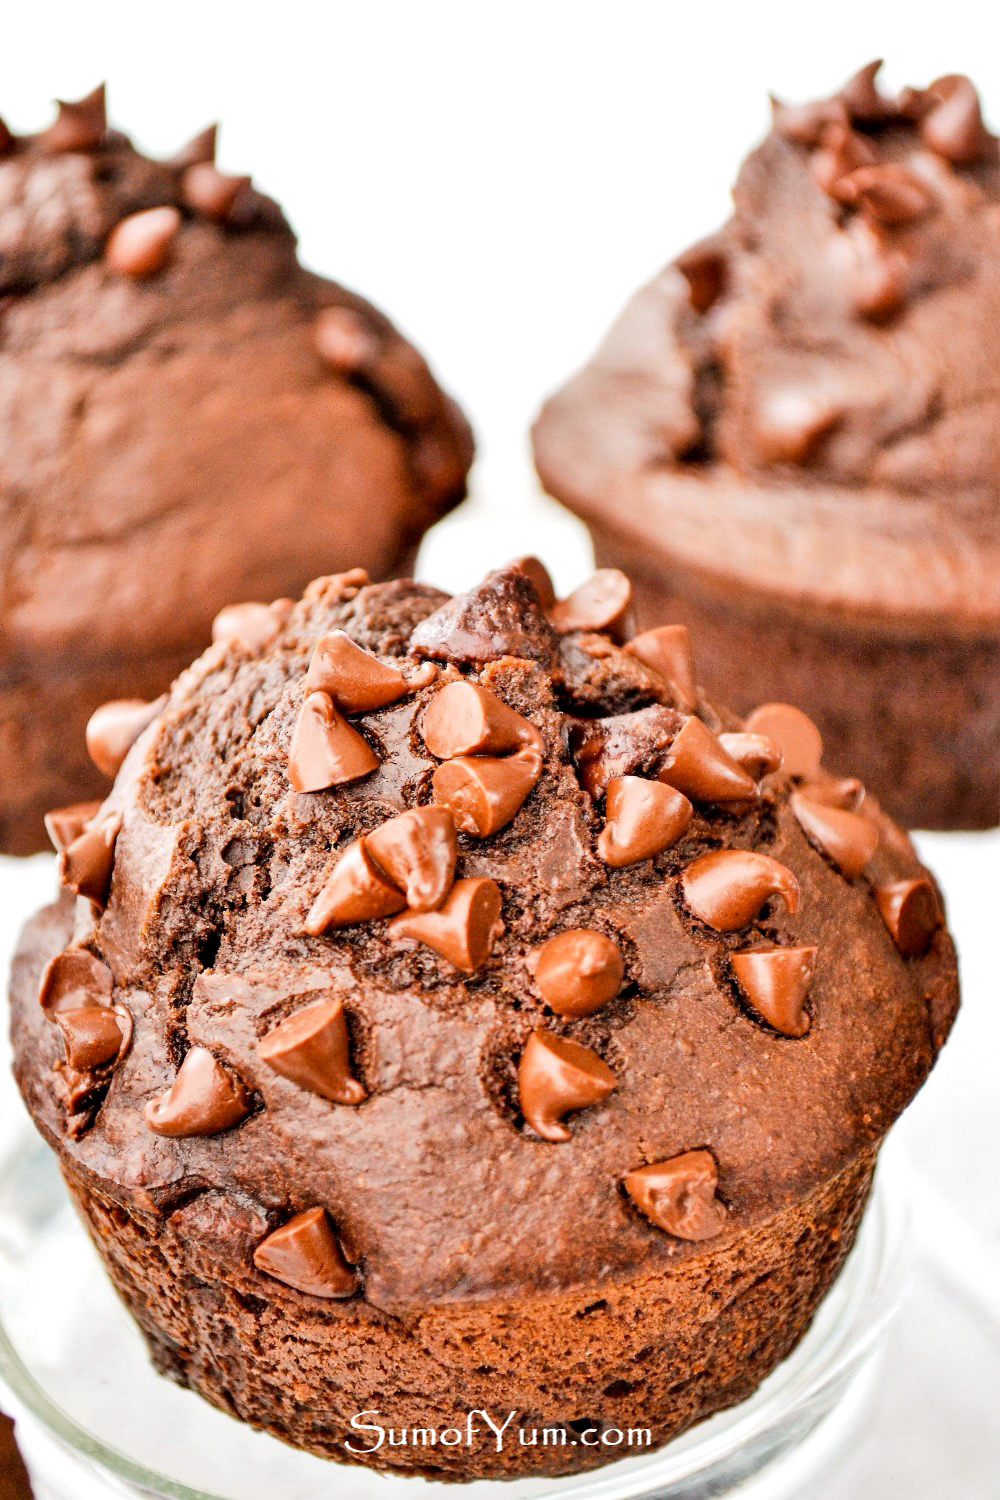 Double Chocolate Muffins 